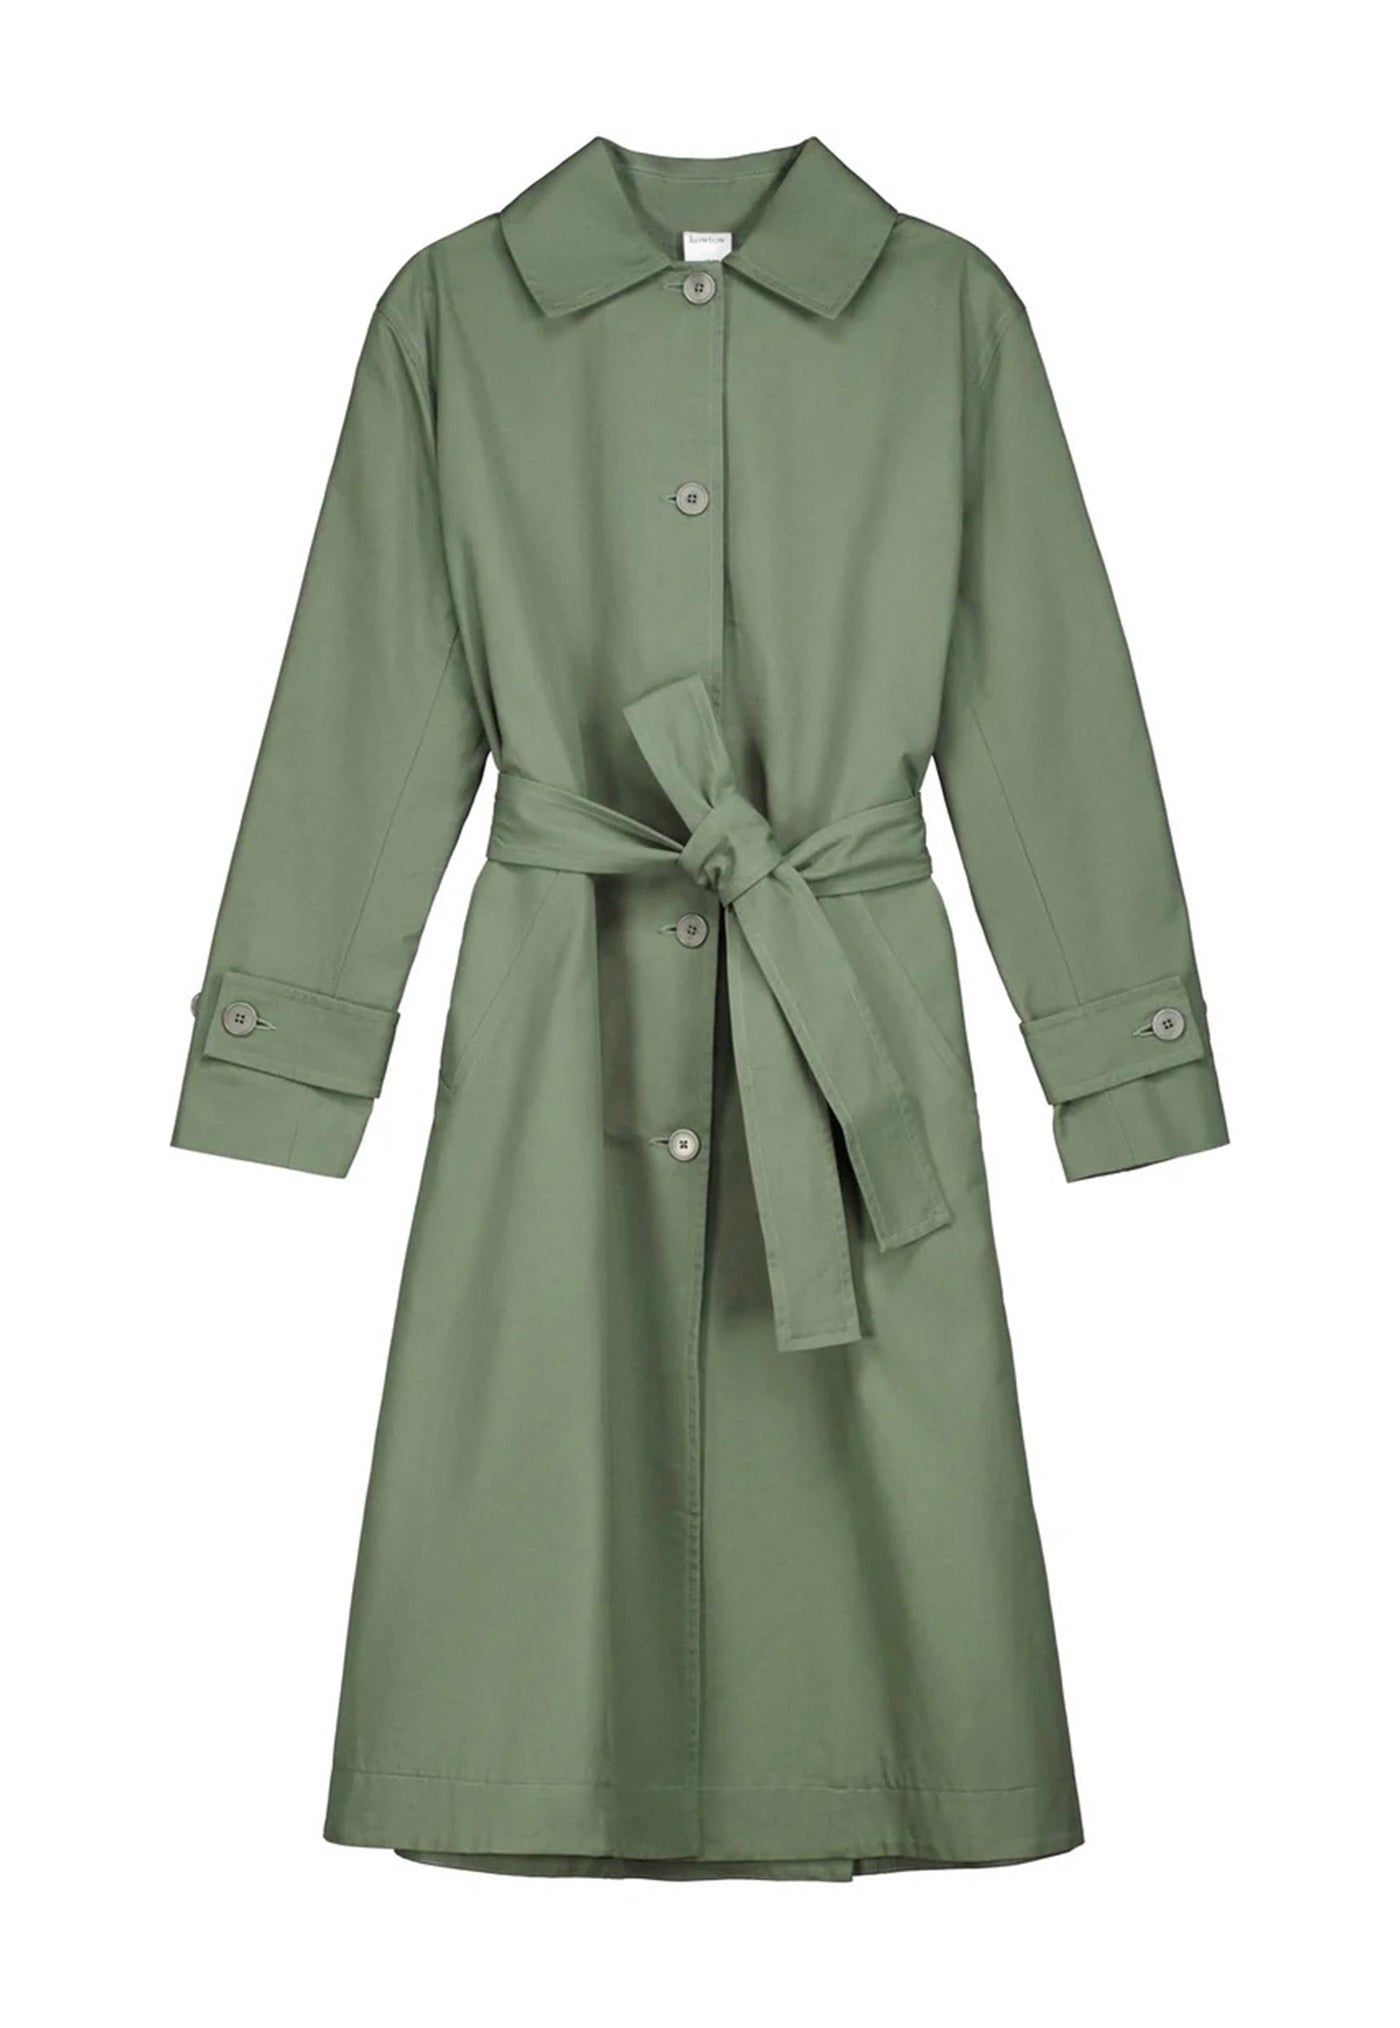 Cleo Trench Coat - Sage sold by Angel Divine